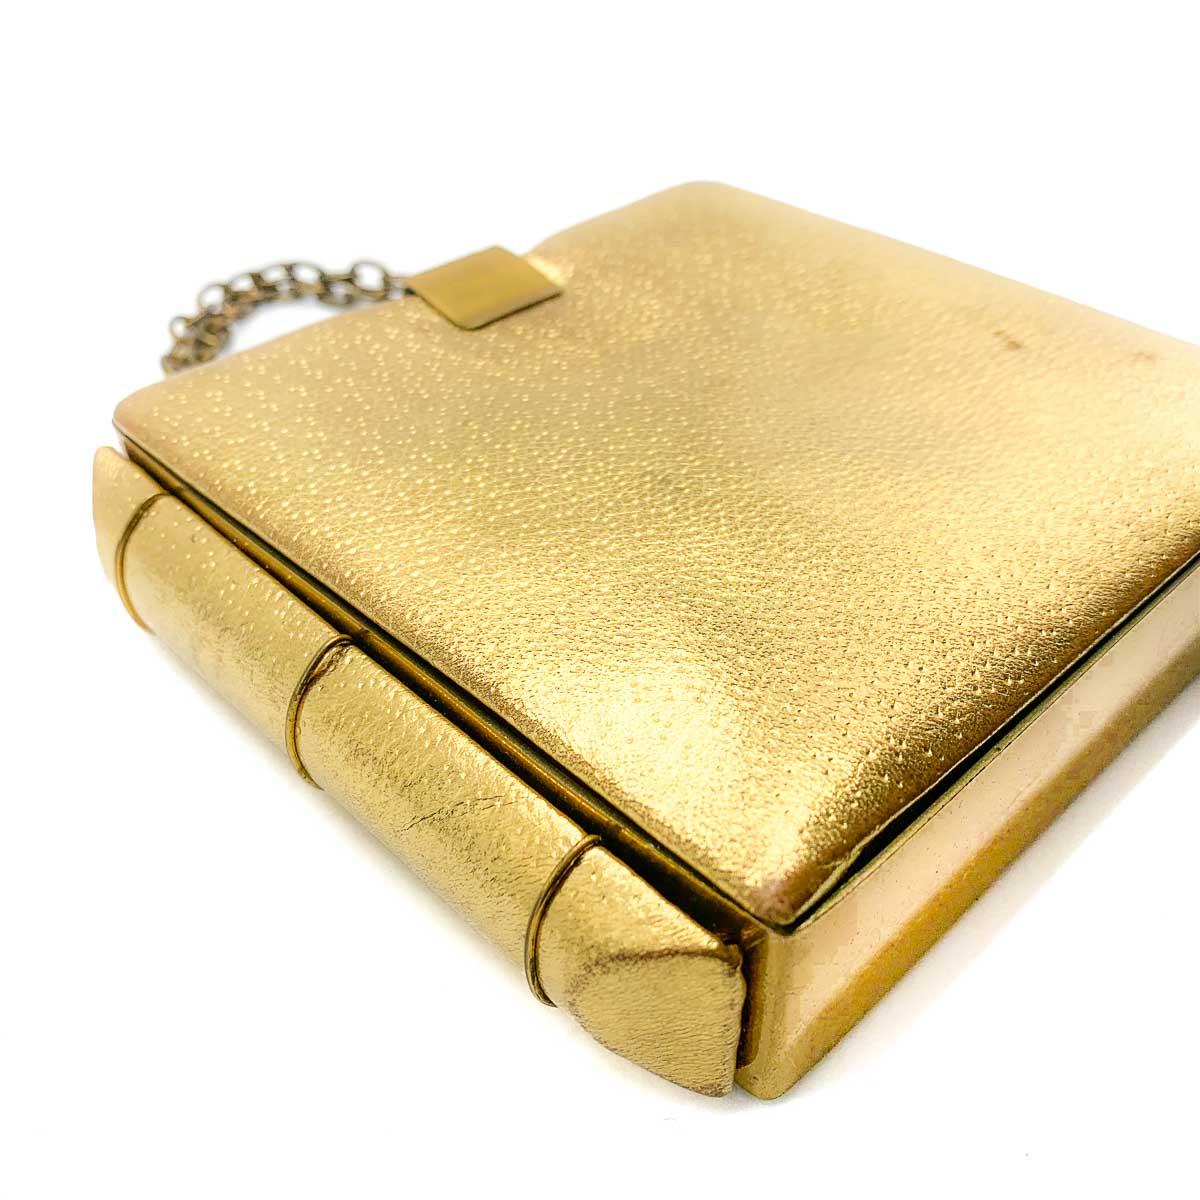 A Vintage Art Deco Gold Bookend Minaudiere. A stunning find from the 1930s Art Deco period. A minaudiere box style evening purse finished with book-end sides. Crafted in the most wonderful gold leather with finished brass hardware. The interior